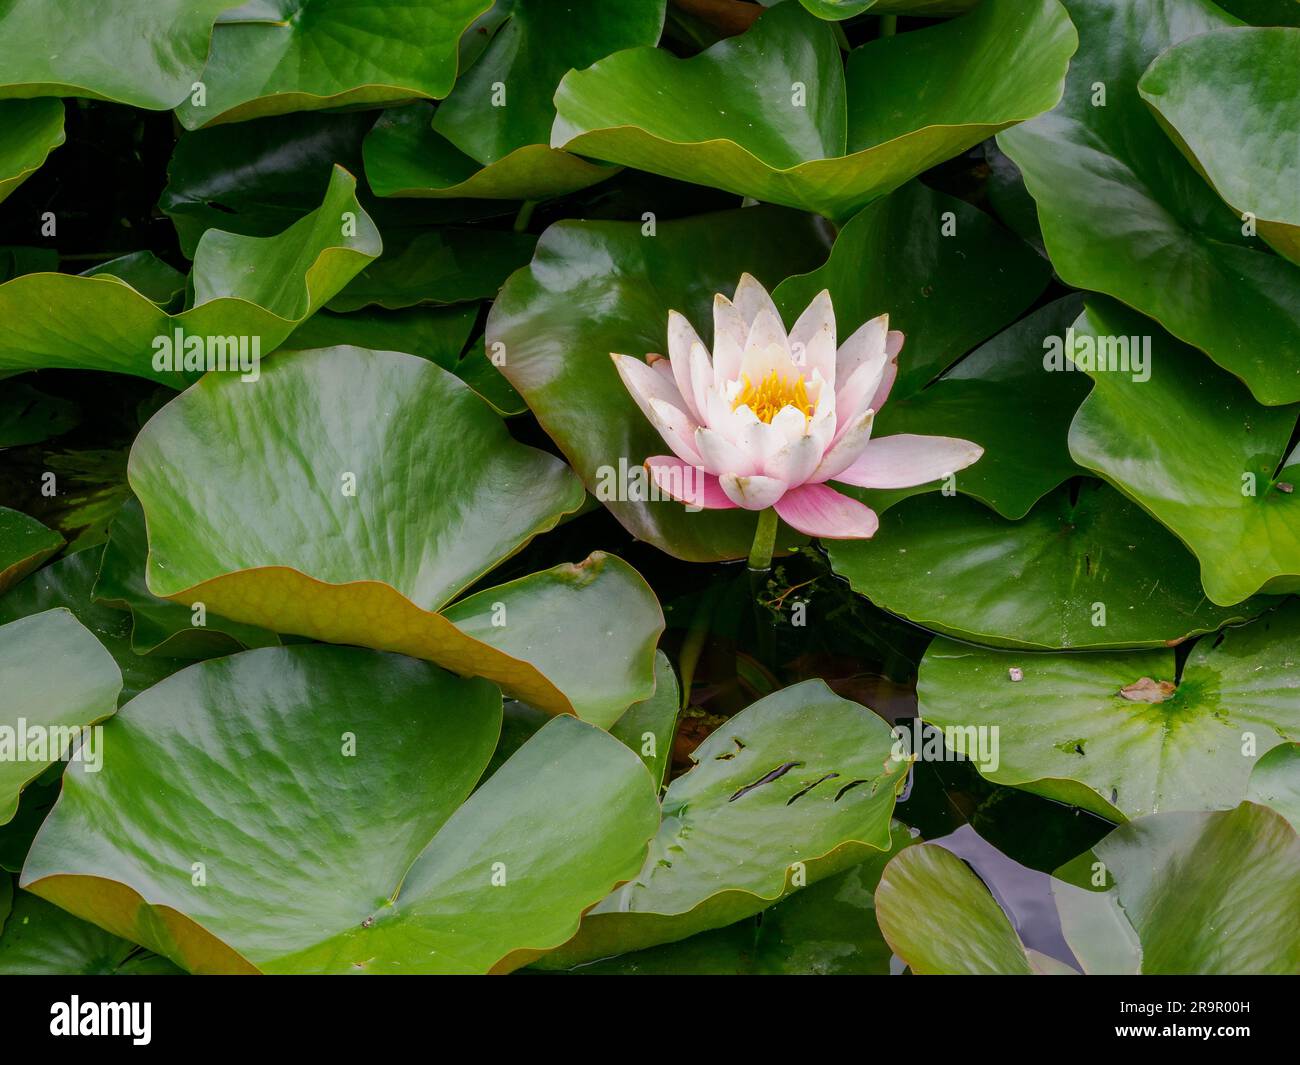 Large pink tinged flower and large leaves of the white water lily Nymphaea Marliacea Group 'Carnea' in a small lake of a UK garden Stock Photo